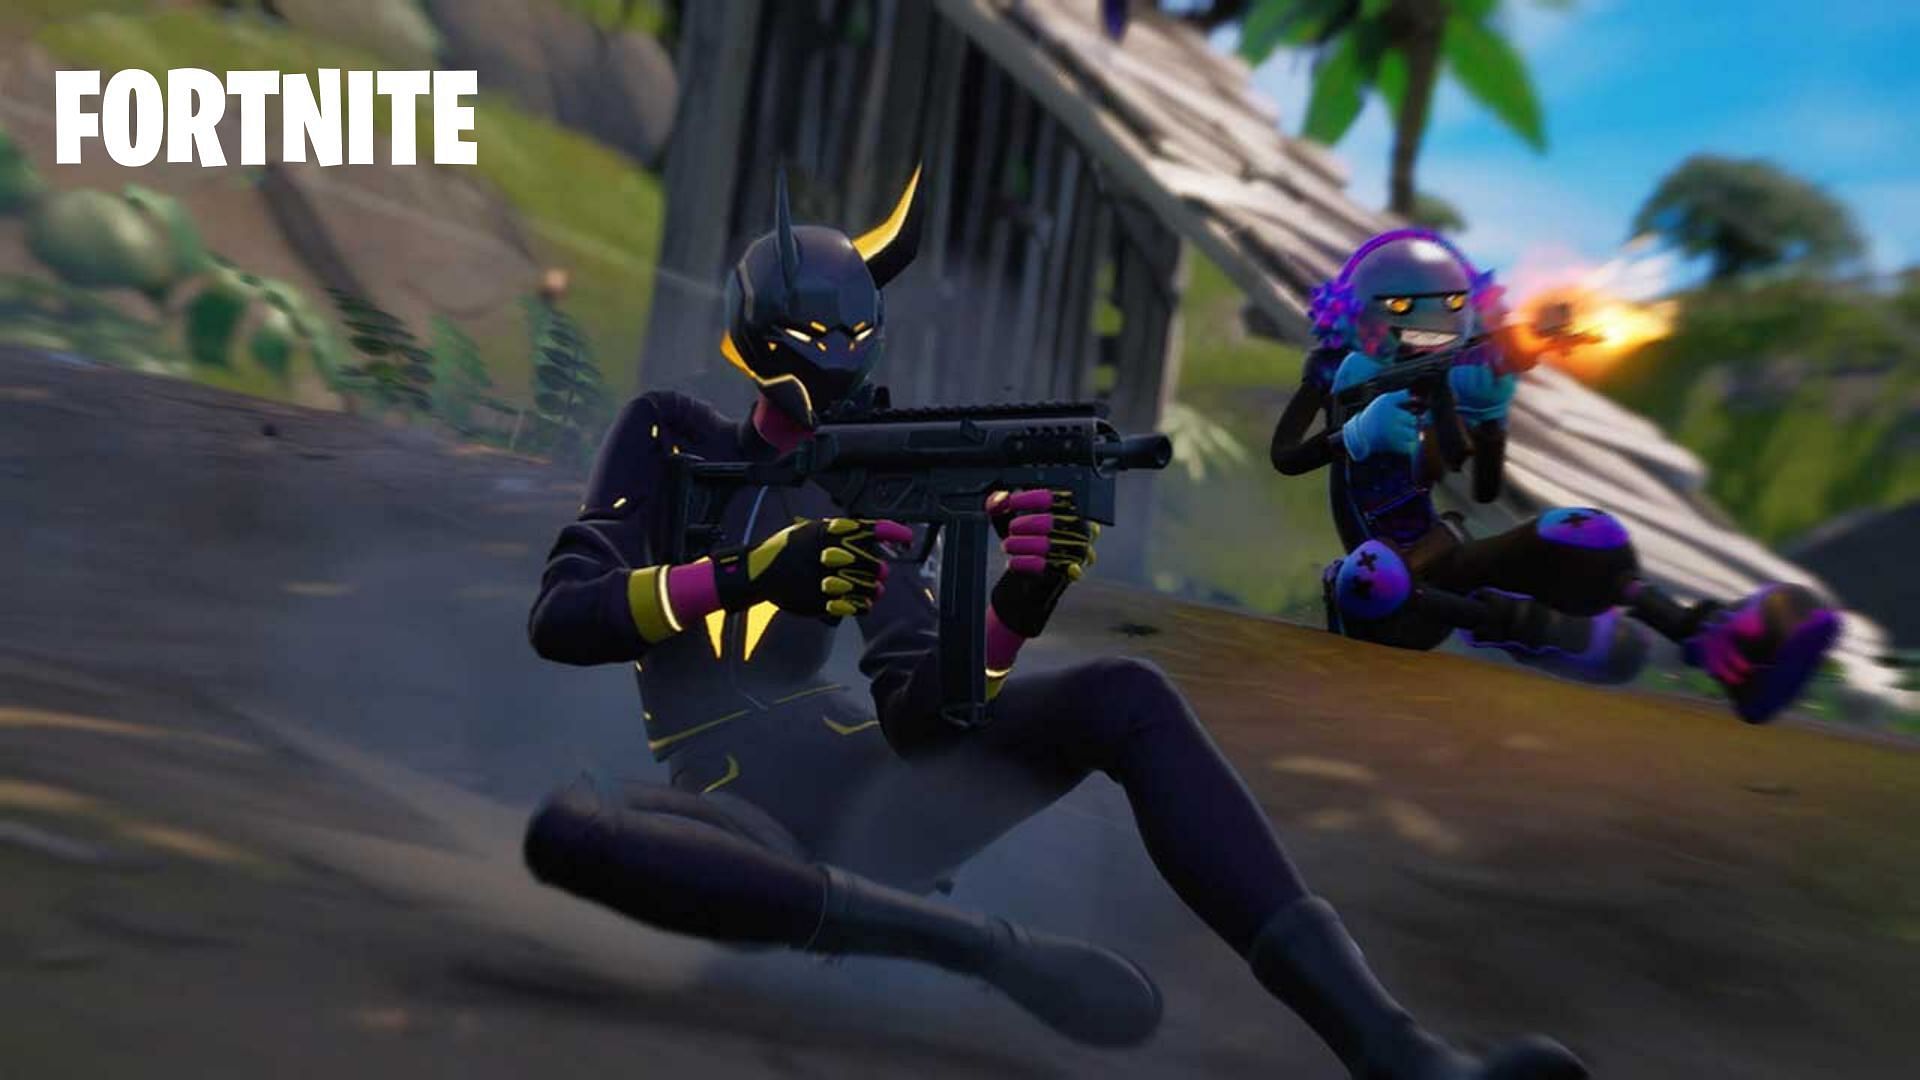 Fortnite pro players claim everyone is cheating